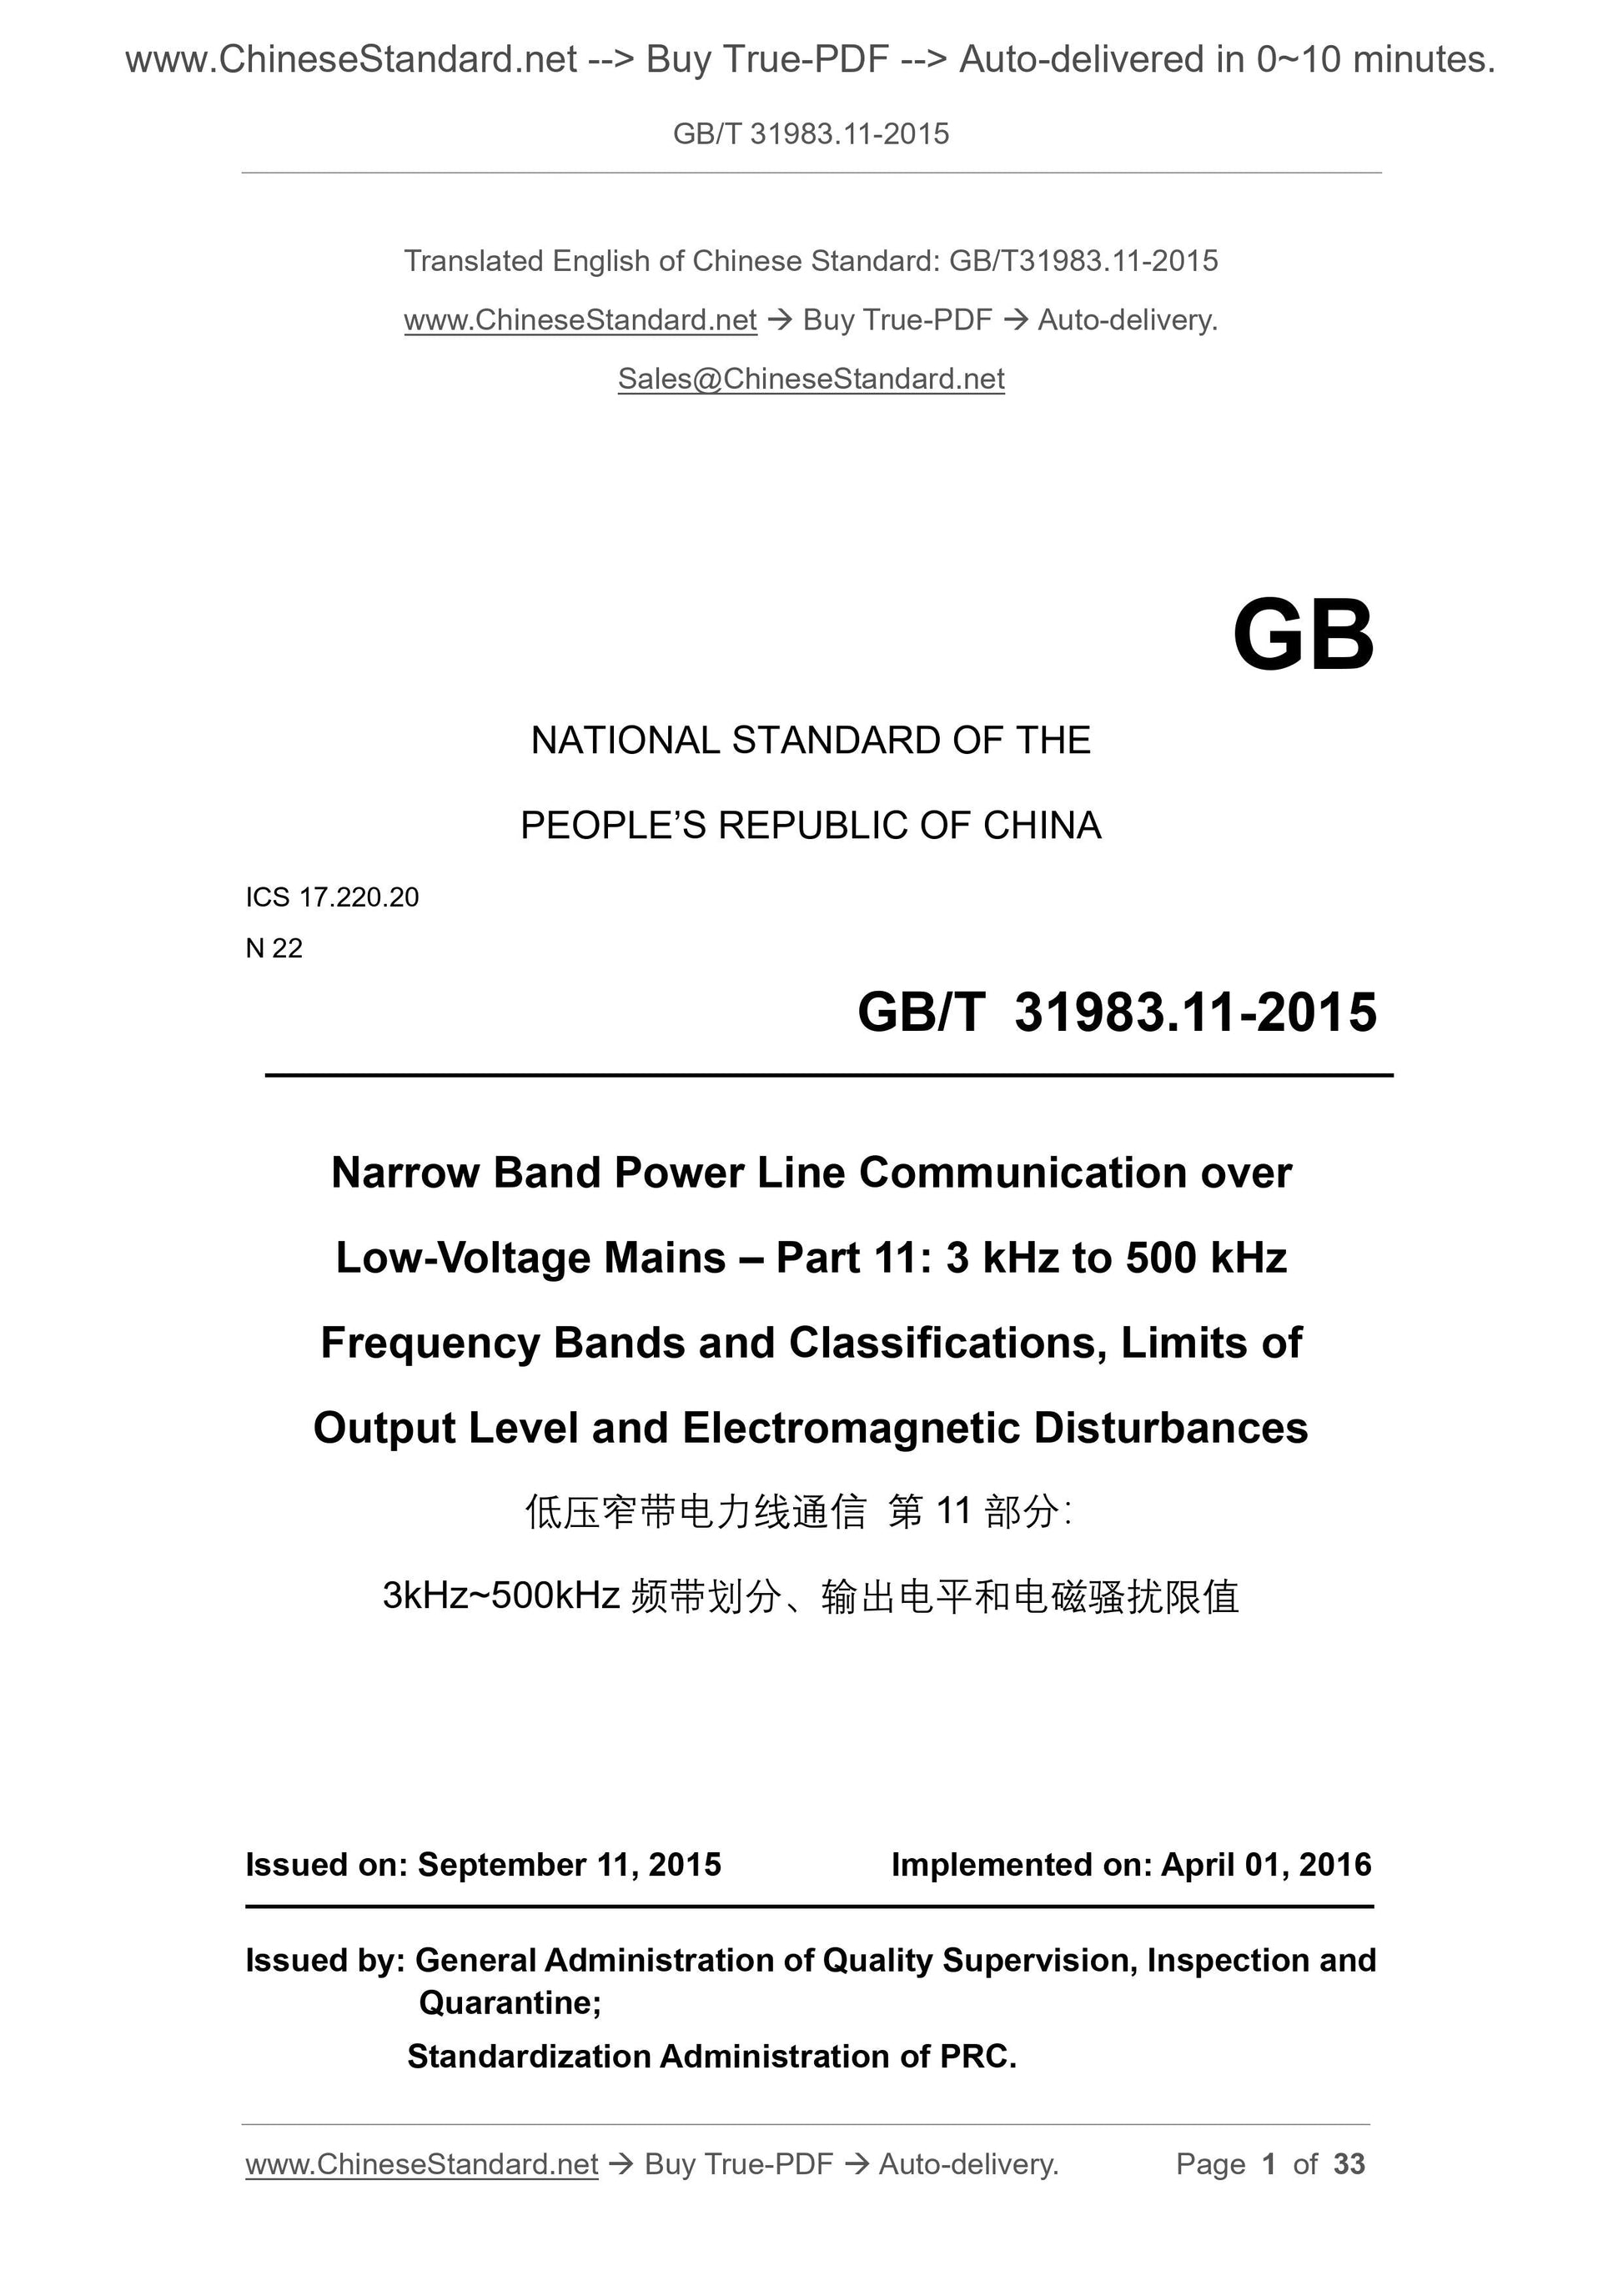 GB/T 31983.11-2015 Page 1